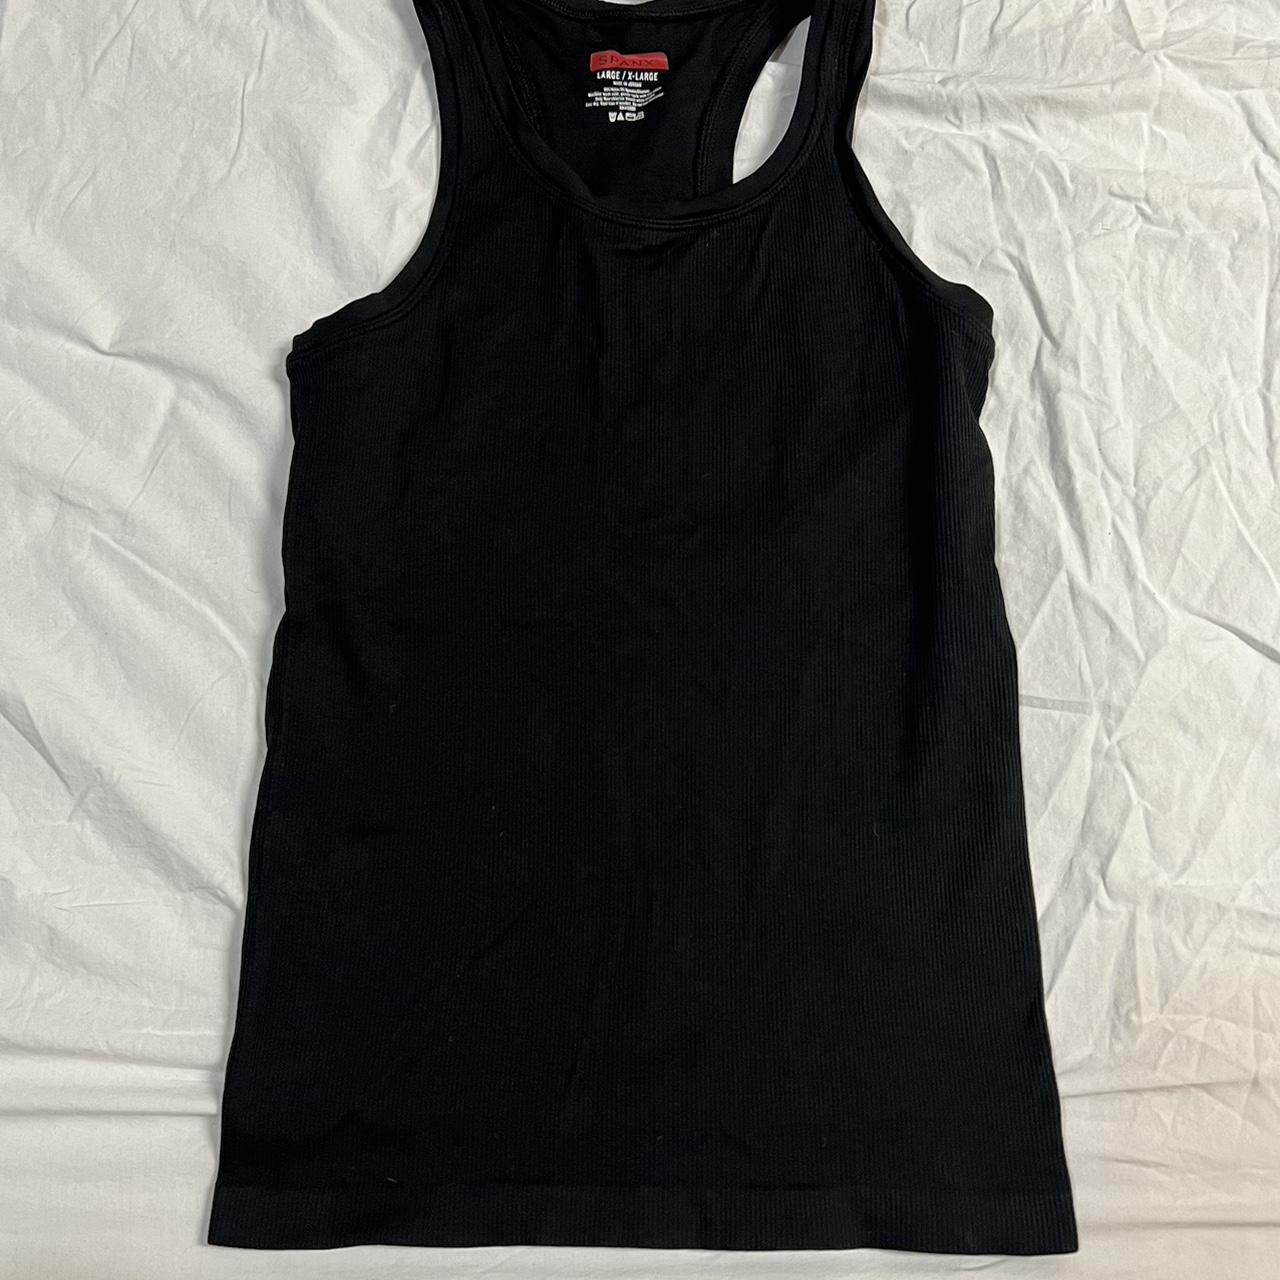 Spanx, hold you in and thin tank top, size L/XL, - Depop